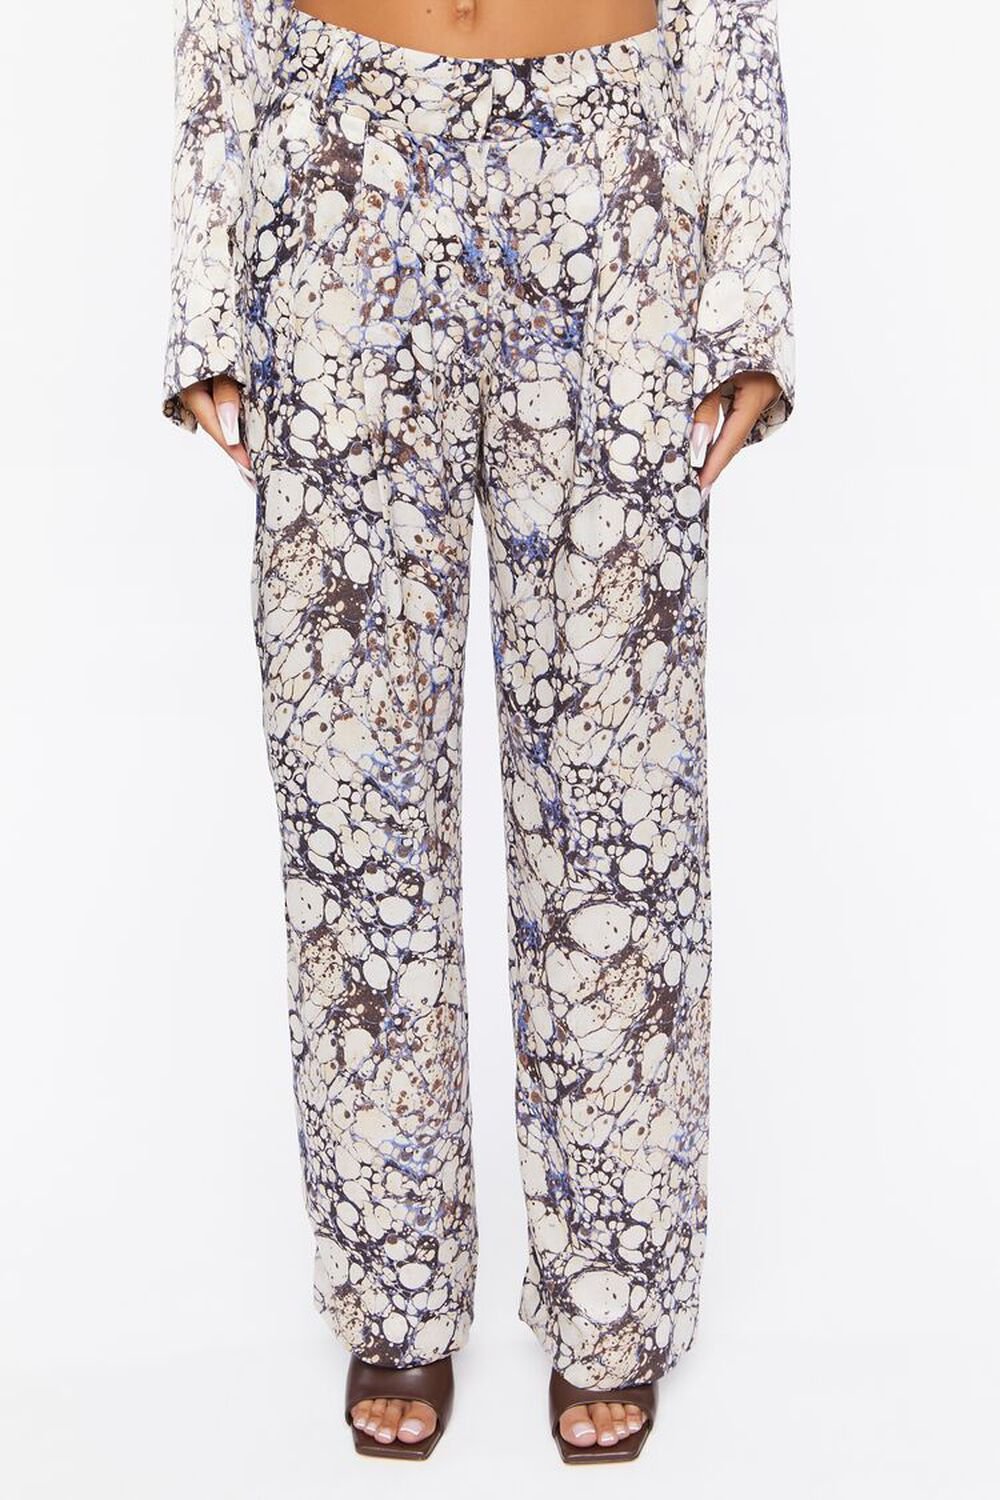 CREAM/MULTI Abstract Marble Print Trouser Pants, image 2